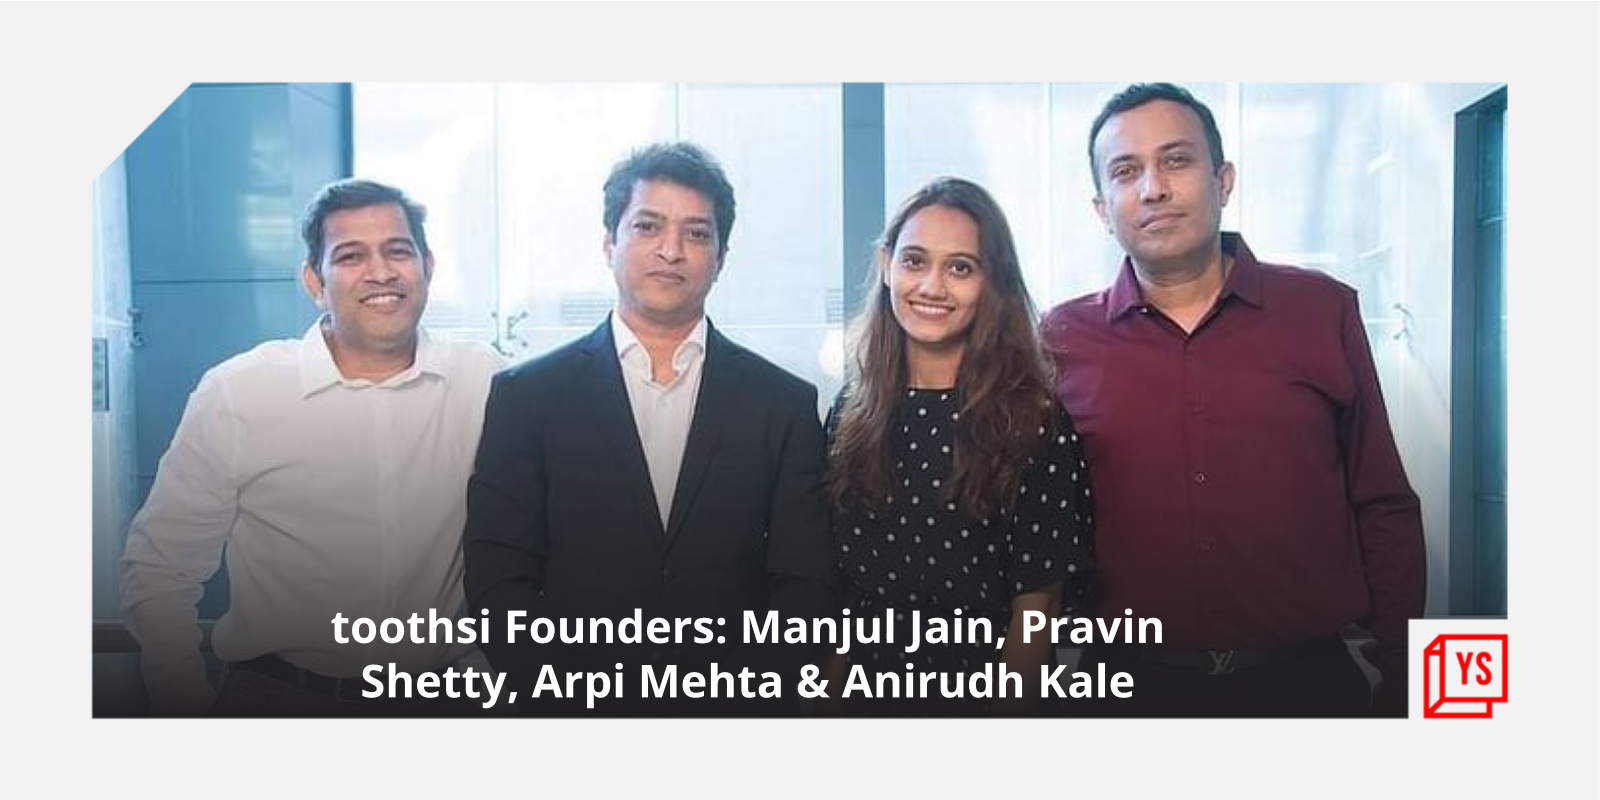 [Funding alert] Clinical beauty tech startup toothsi raises $9M in debt led by Stride Ventures